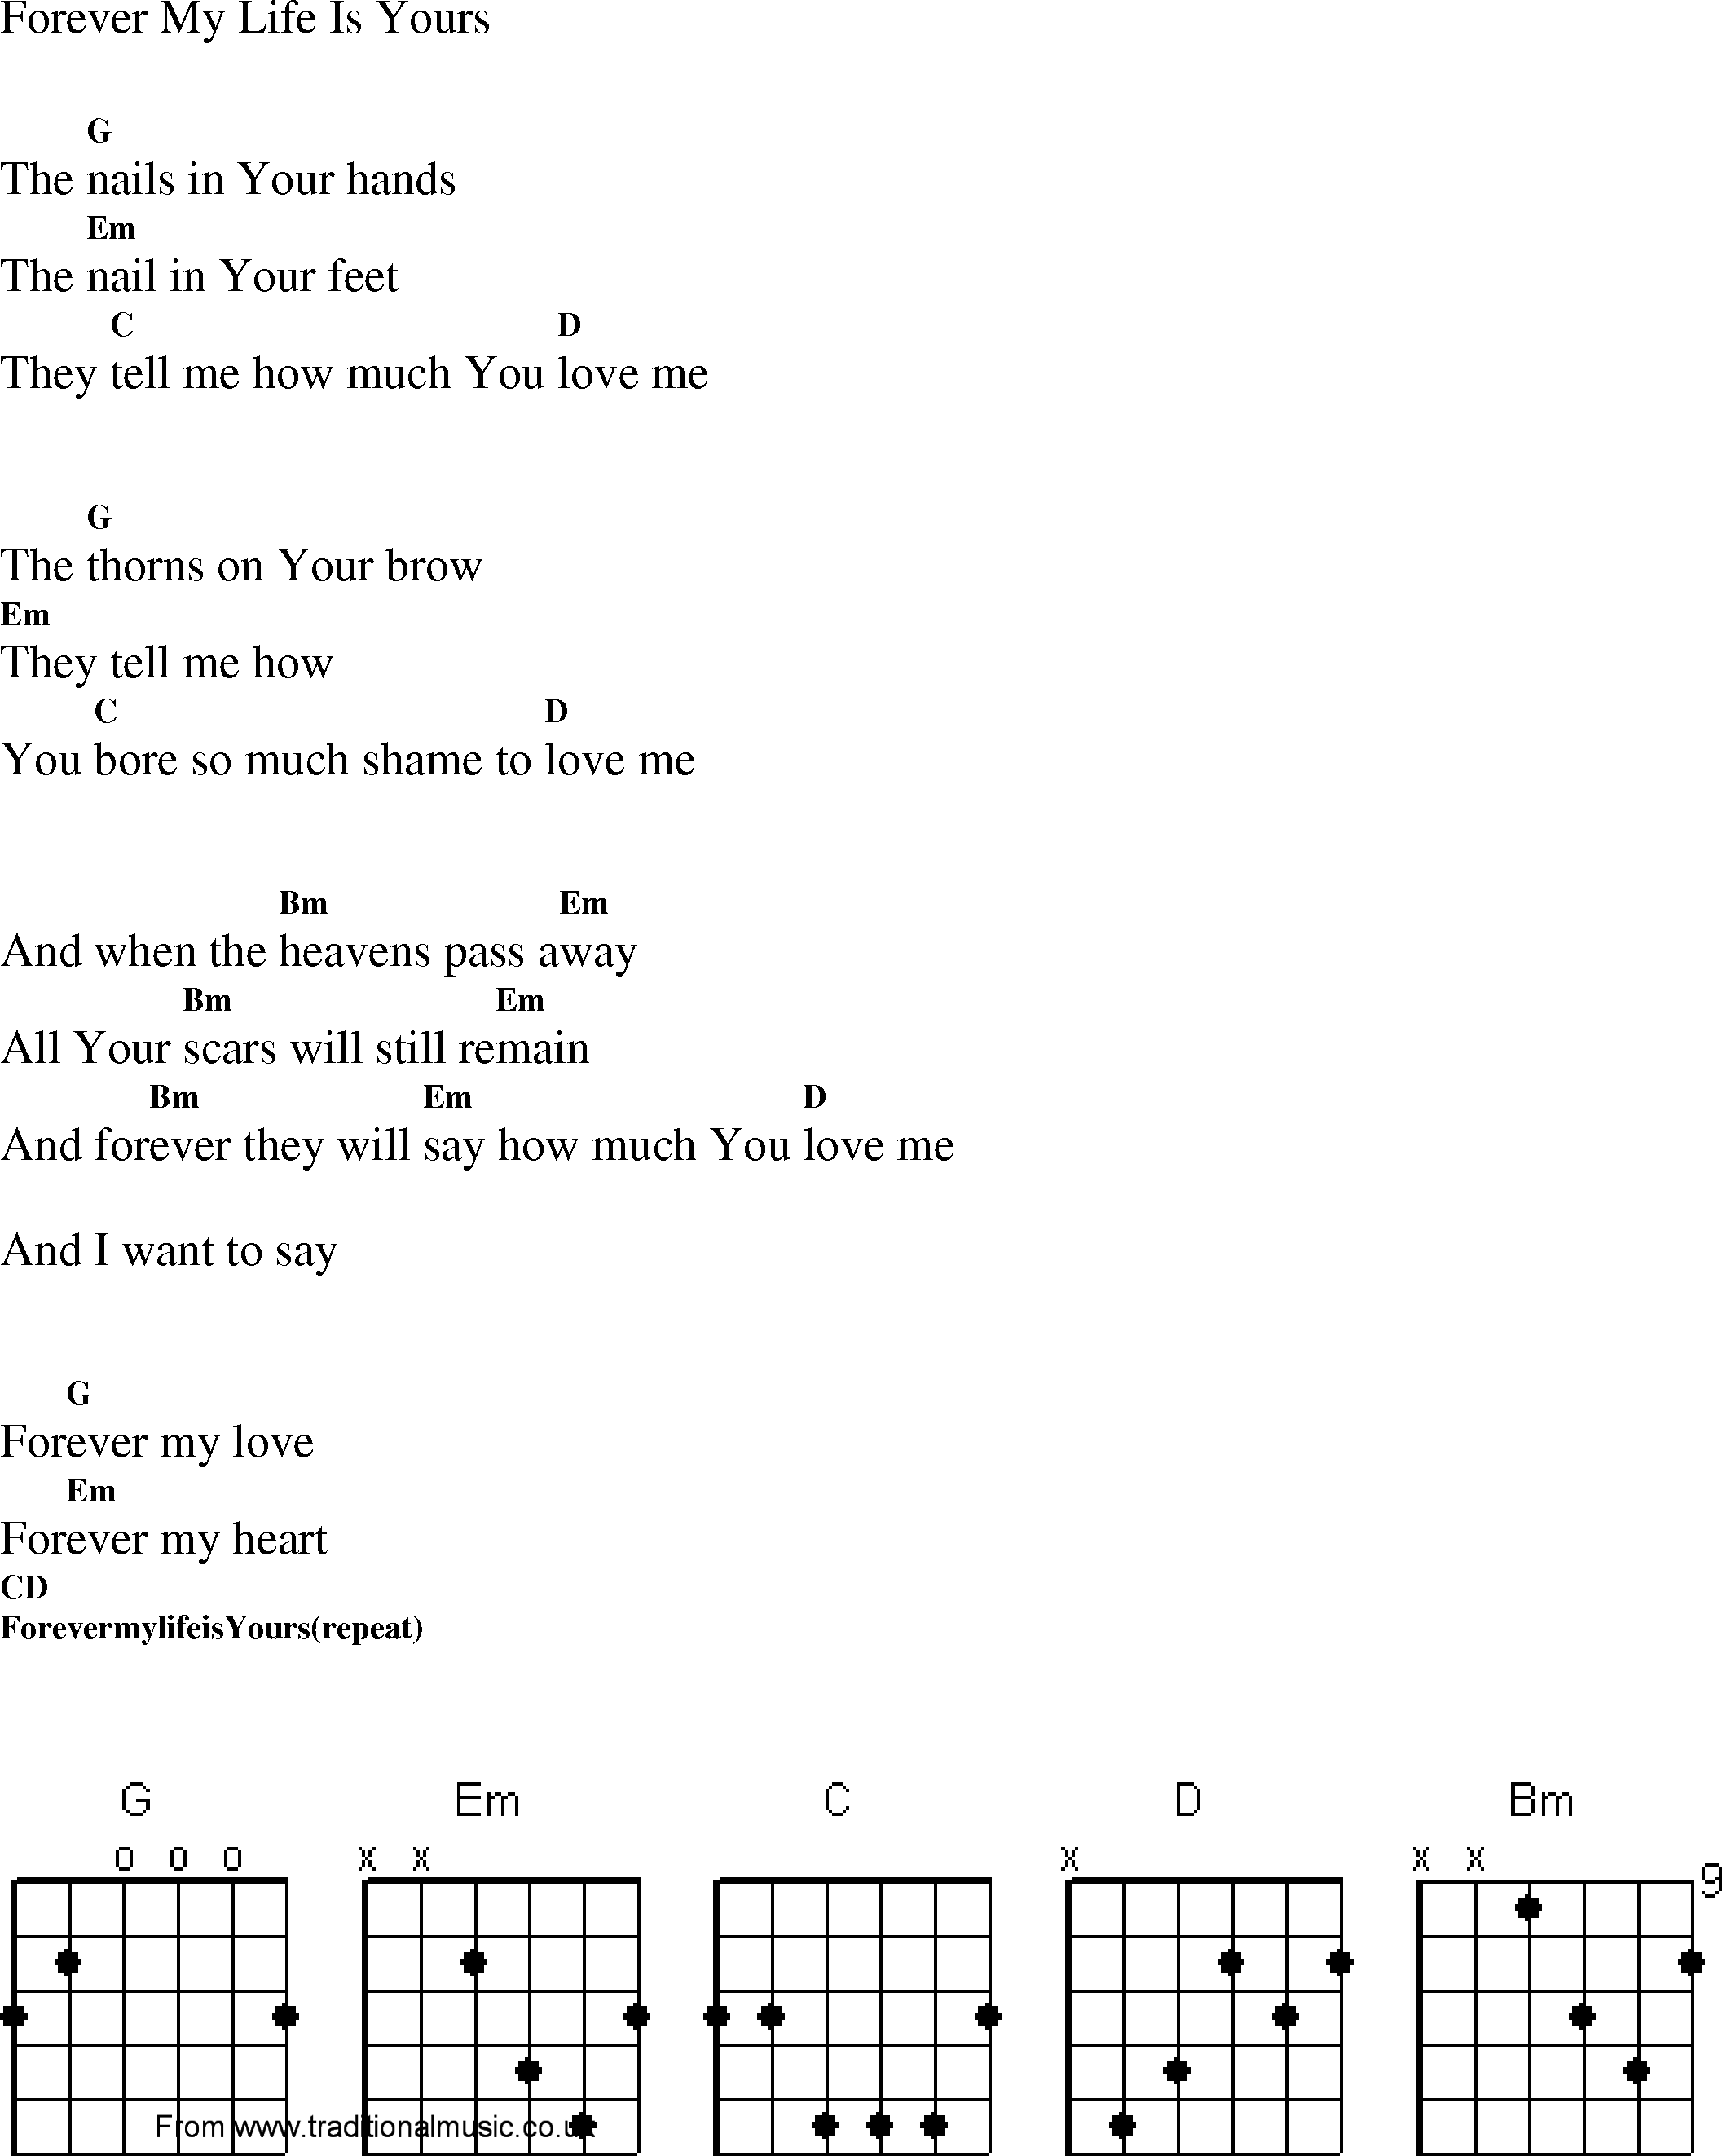 Gospel Song: forever_my_life_is_yours, lyrics and chords.